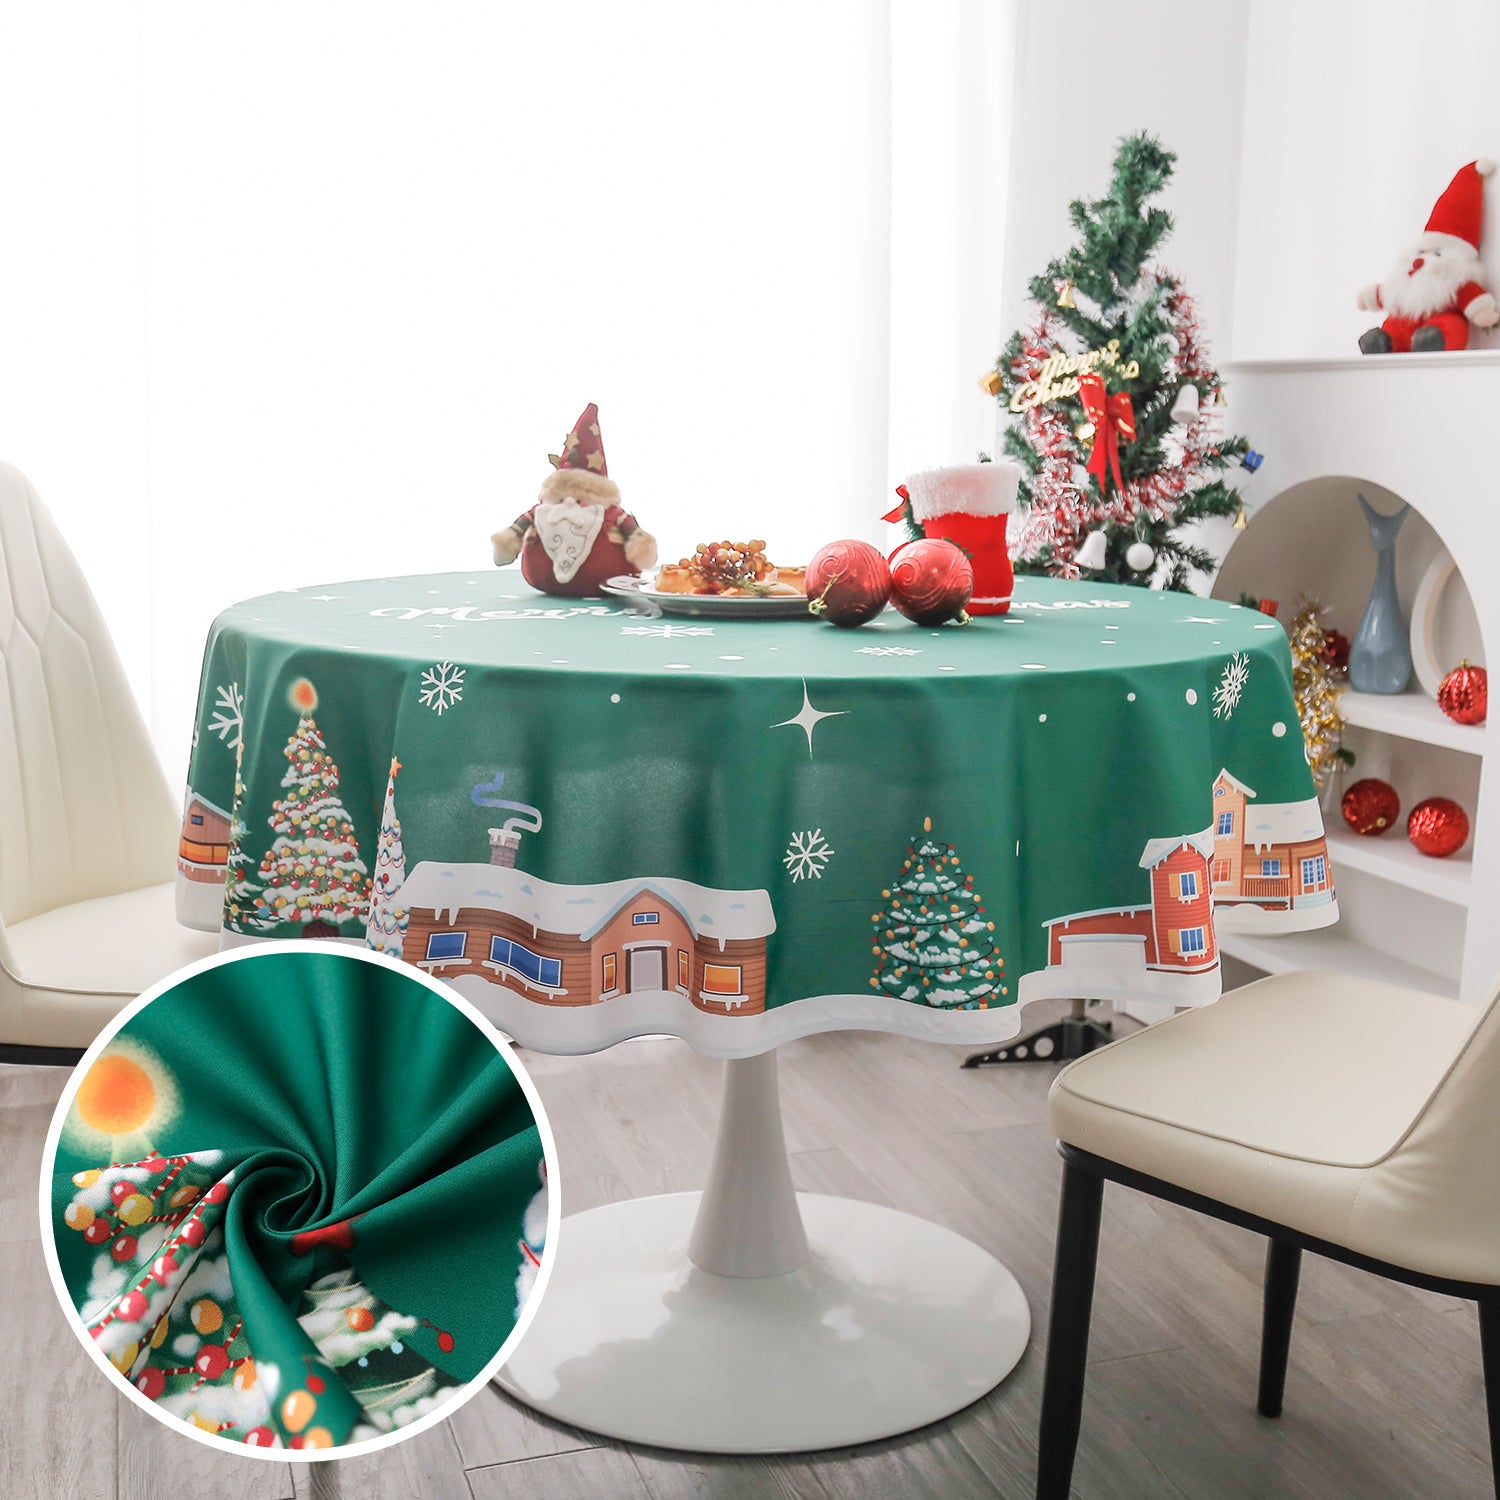 Christmas Log Cabin Pattern Round Tablecloth - Green